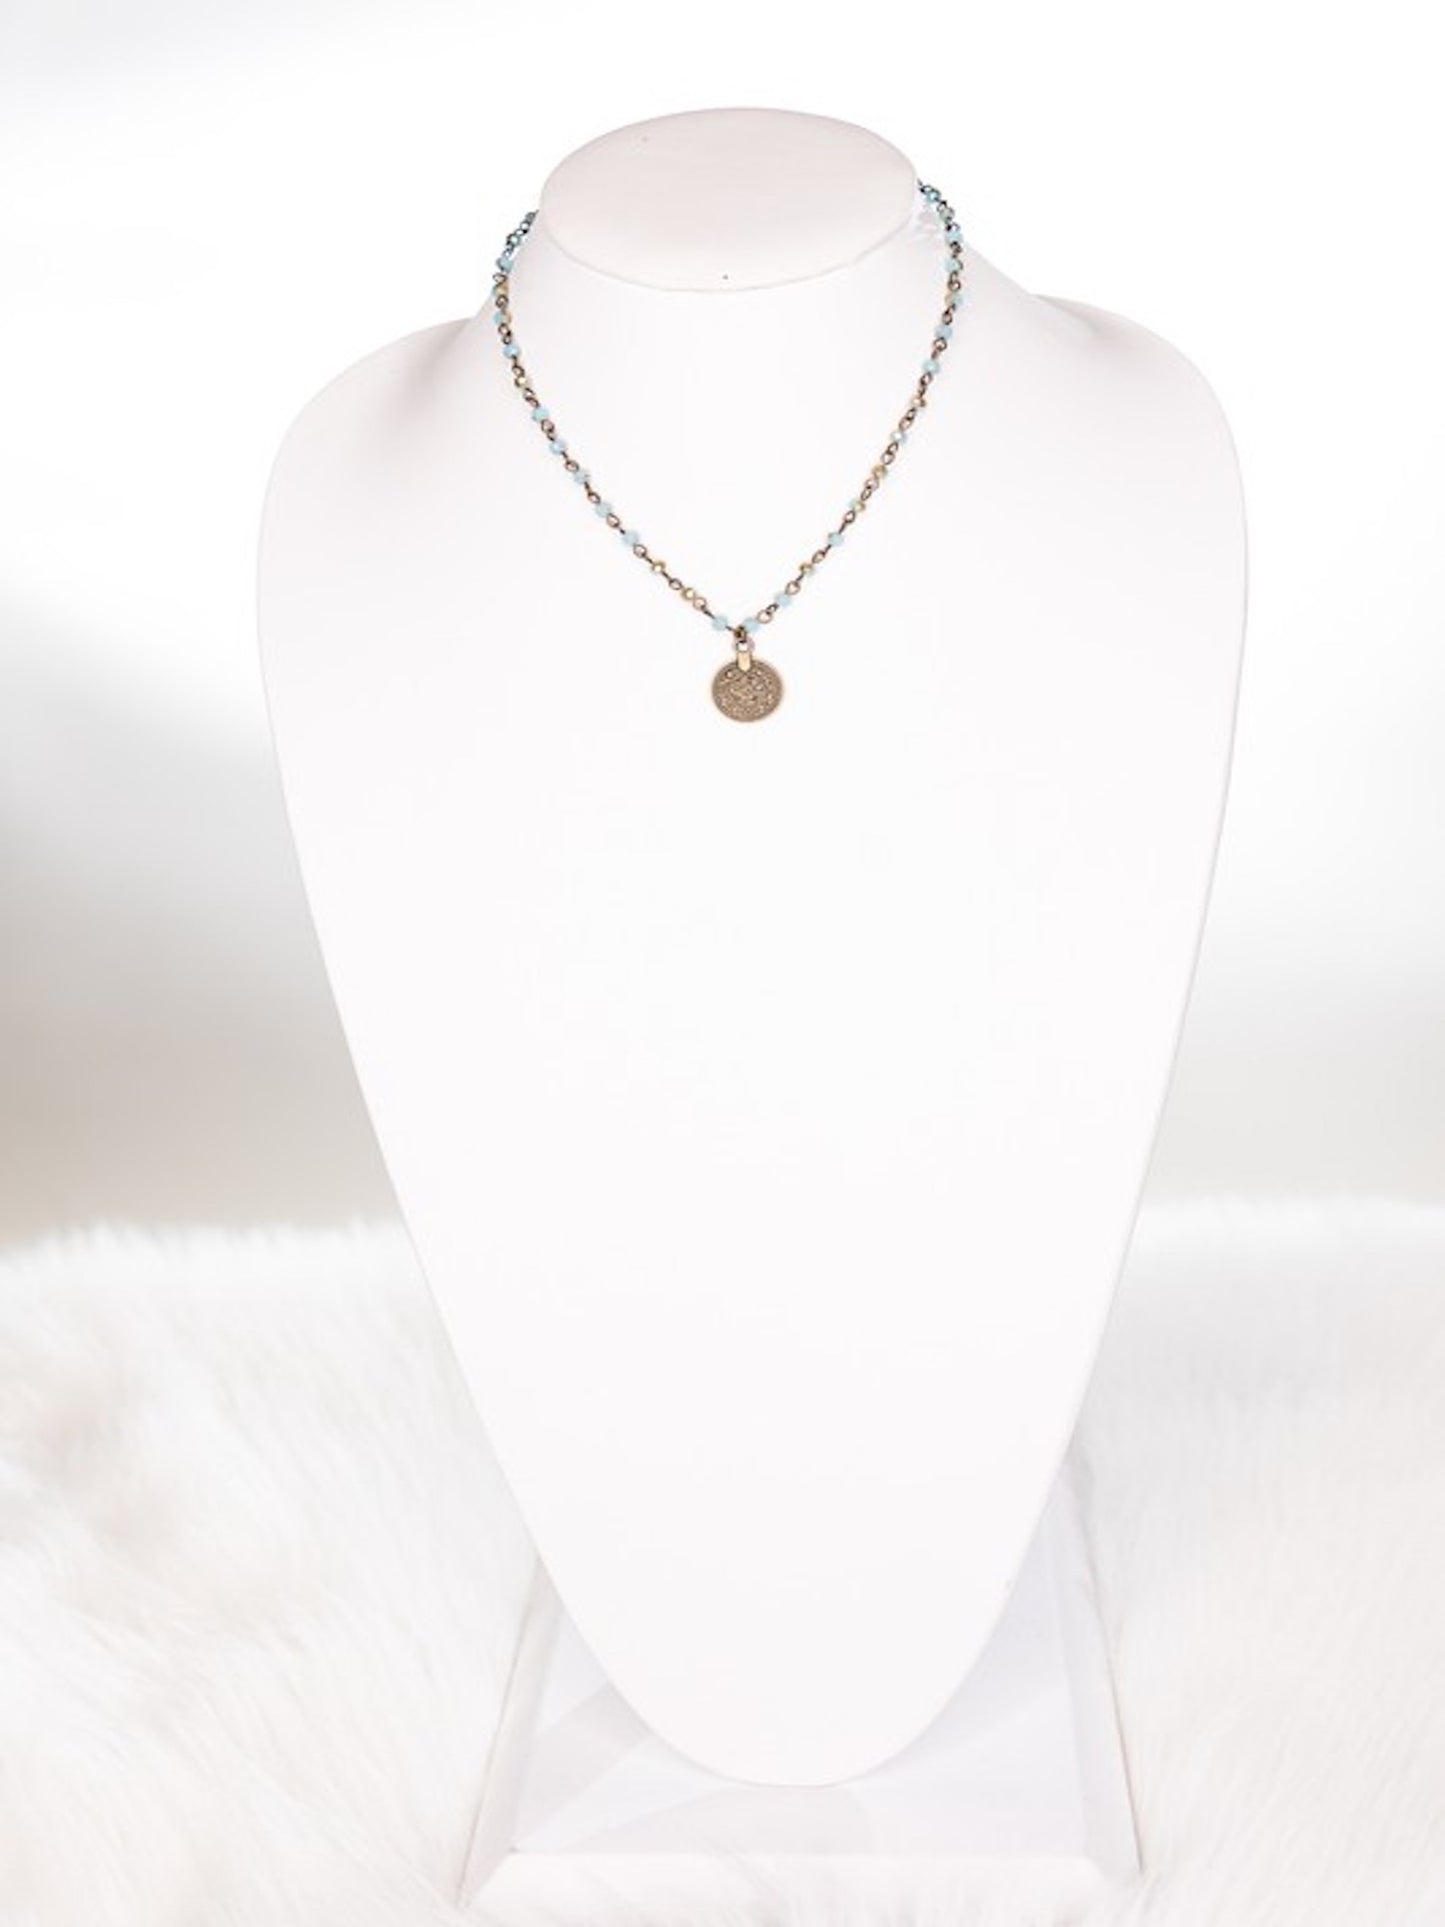 The Roxie Necklace